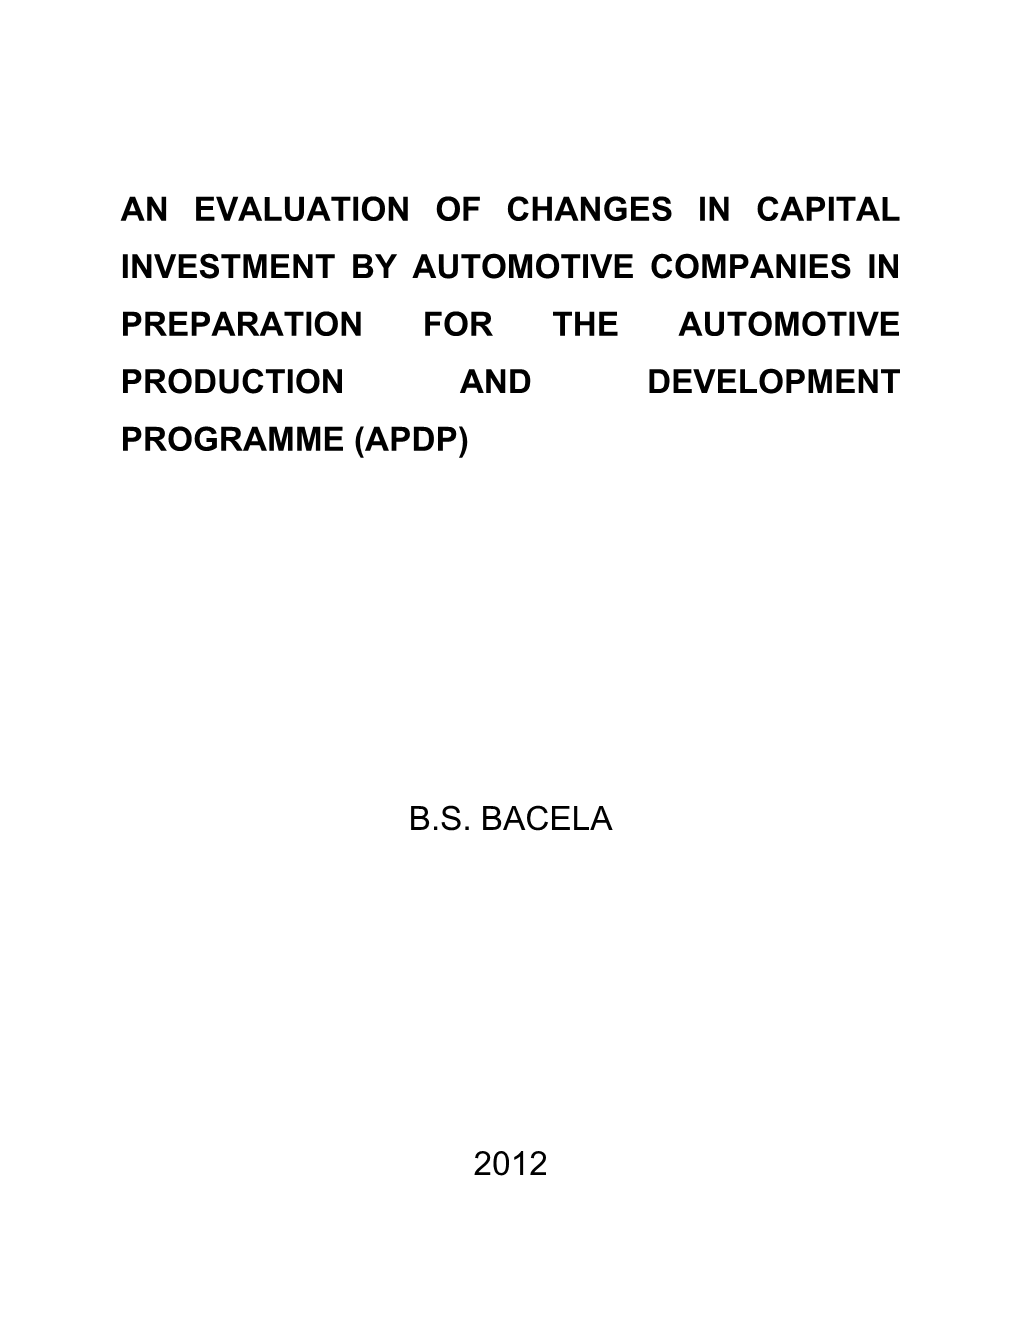 An Evaluation of Changes in Capital Investment by Automotive Companies in Preparation for the Automotive Production and Development Programme (Apdp)